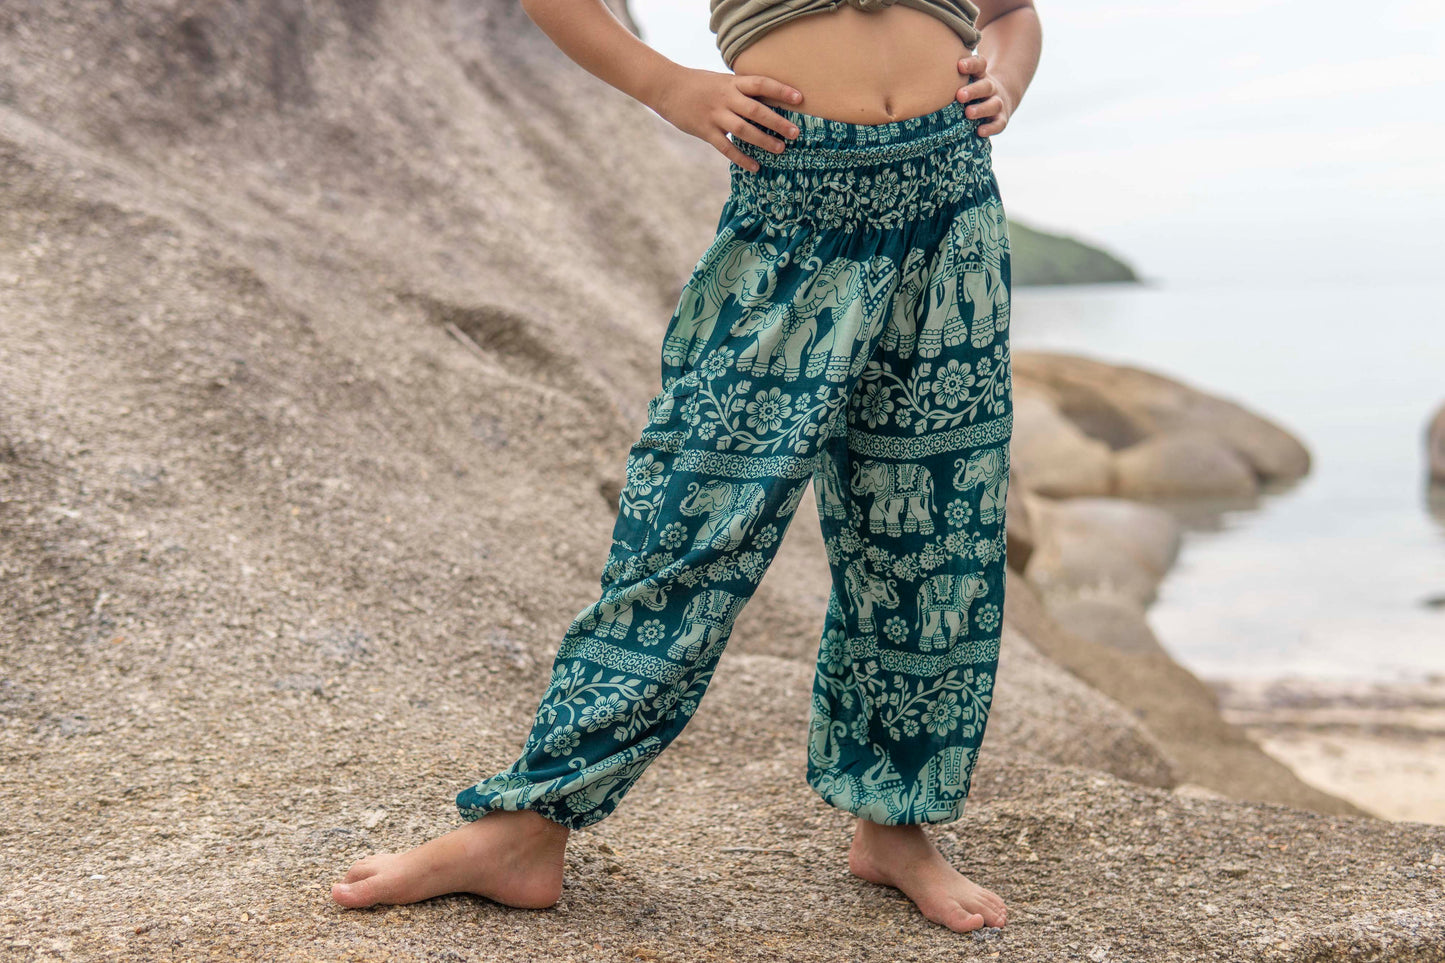 Airy harem pants light blue turquoise with elephants for children 